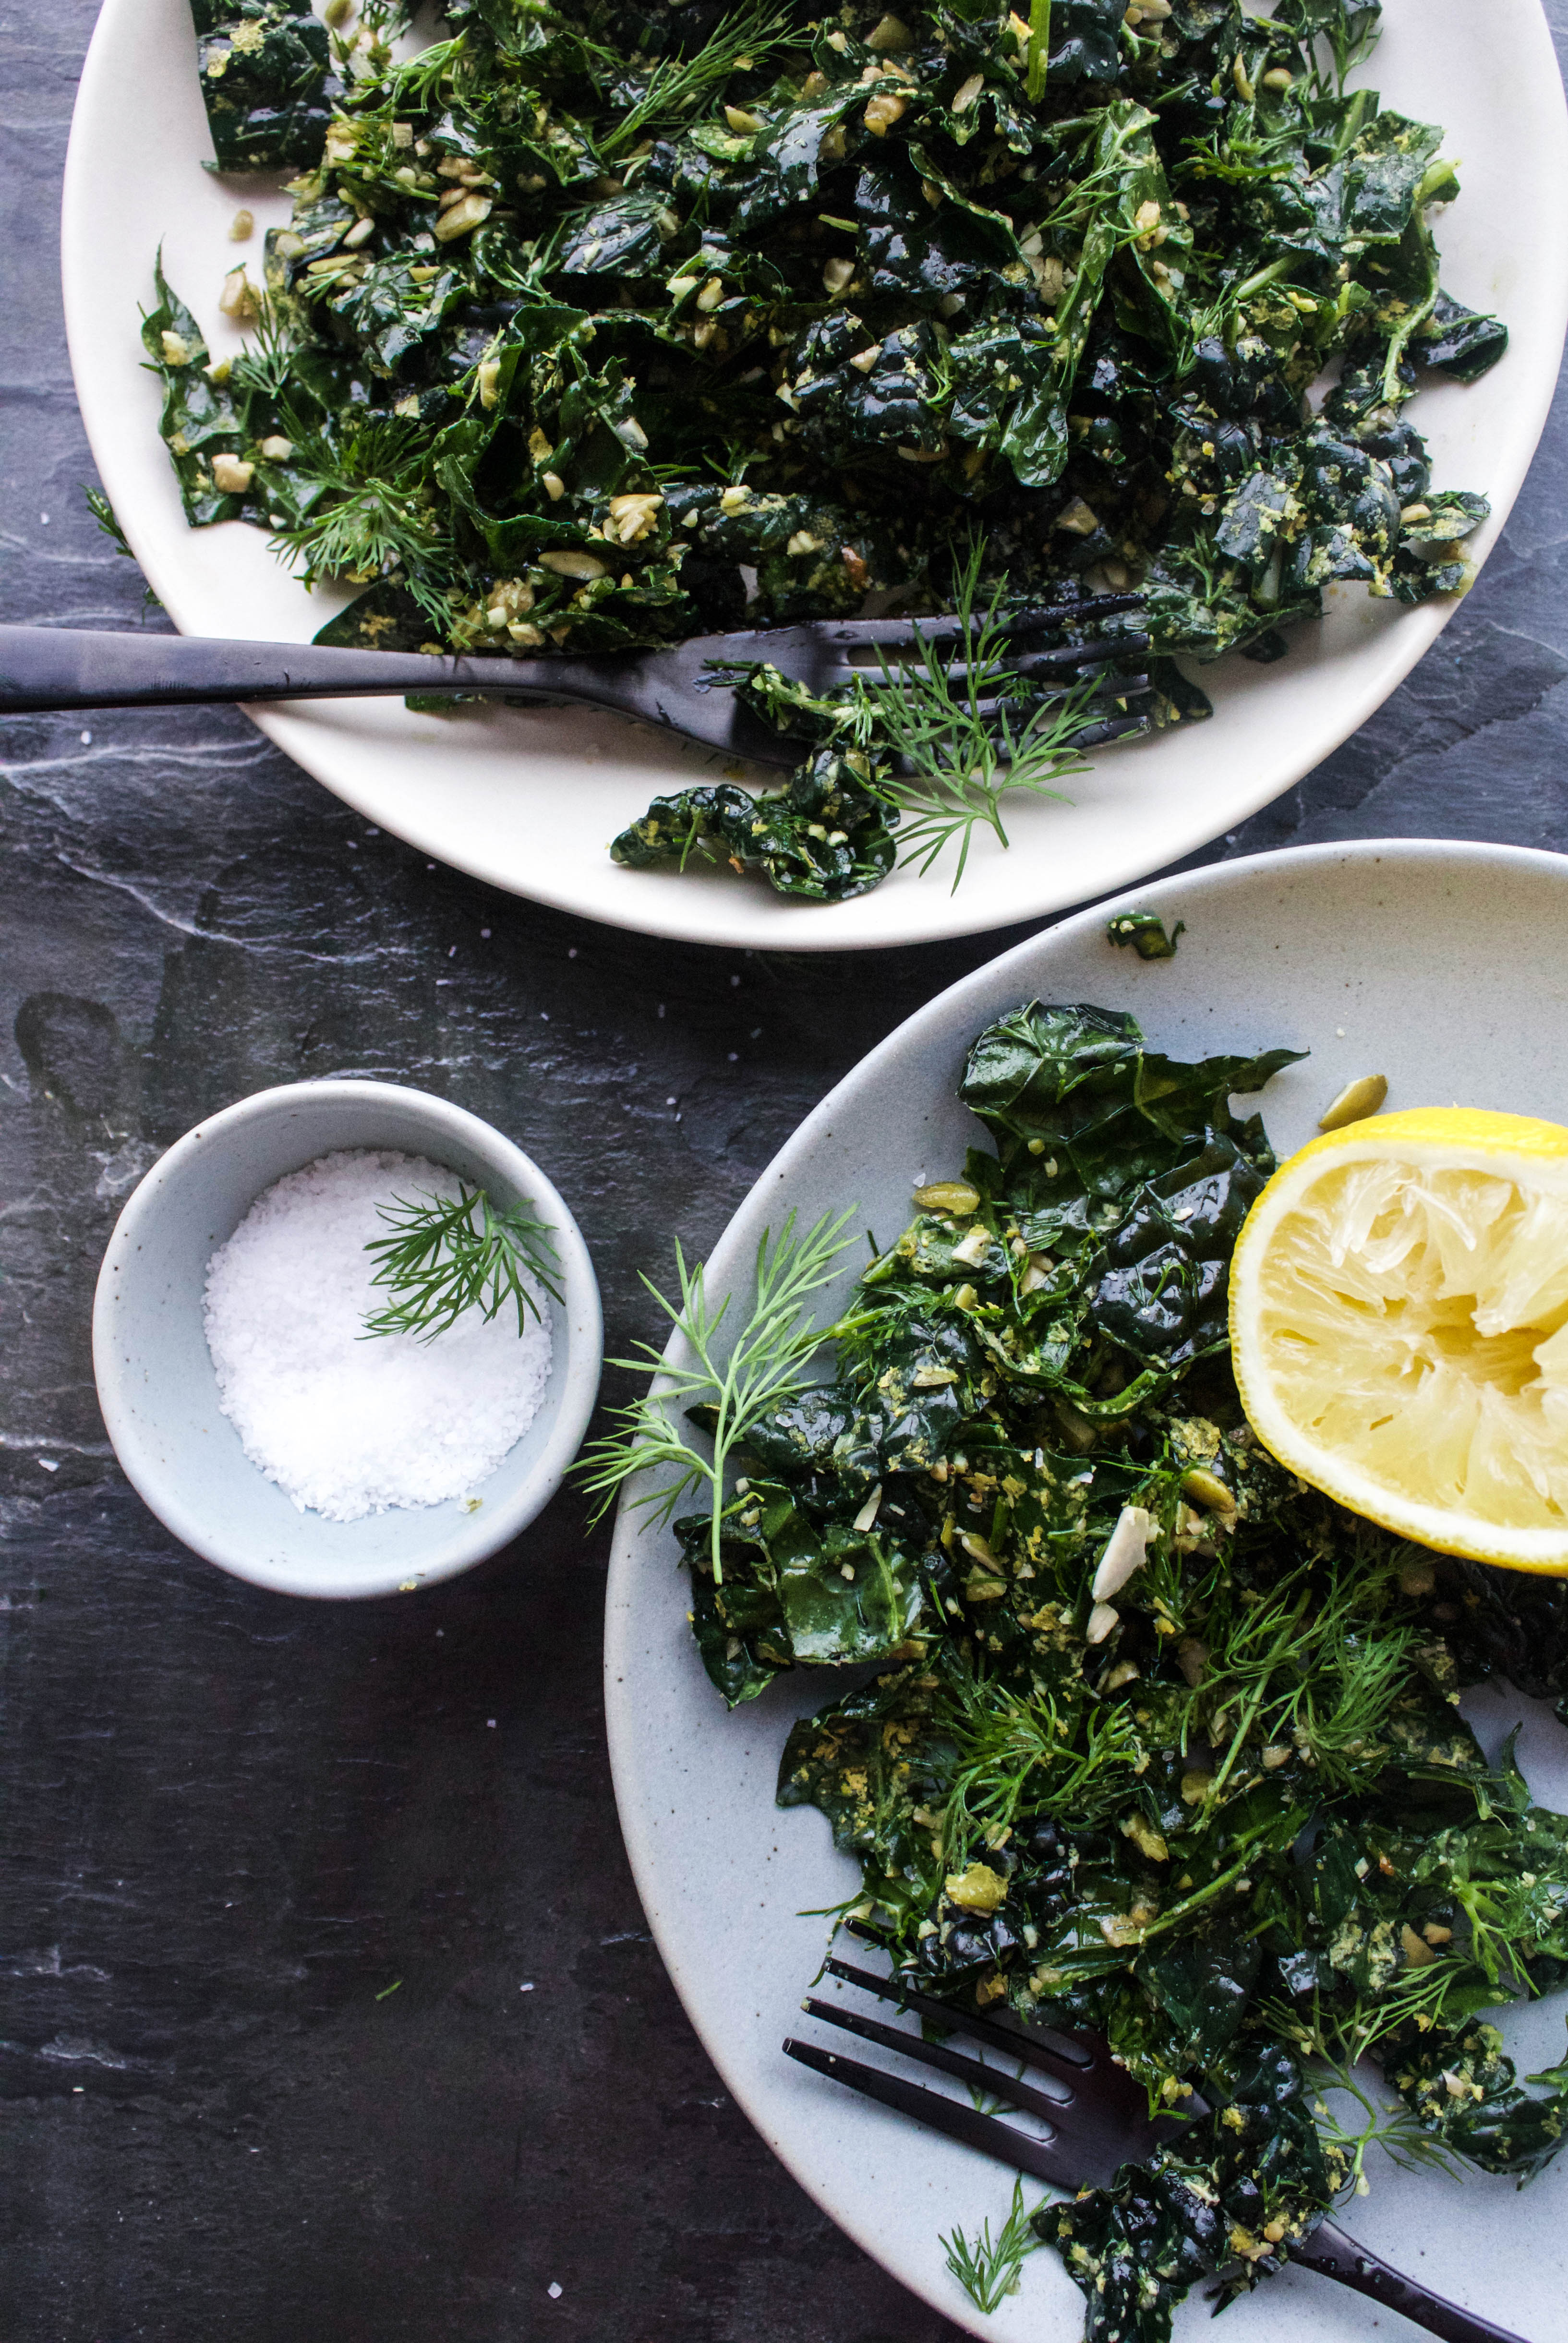 Herby Kale Salad | Earth & Oven